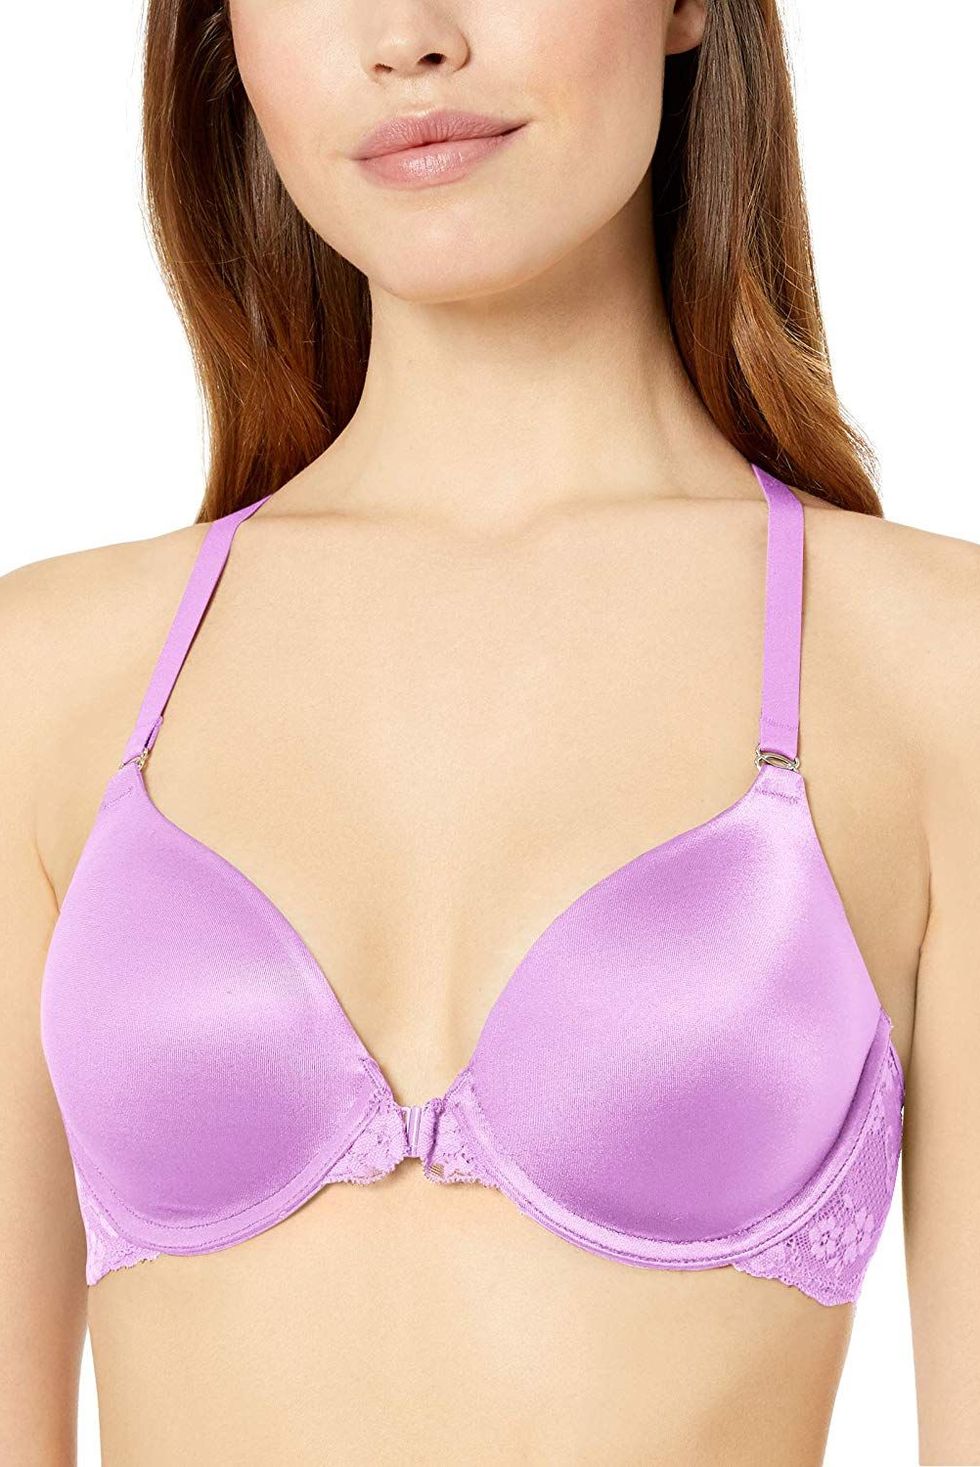 24 Types of Bras 2023 — Different Bra Types and Styles Explained